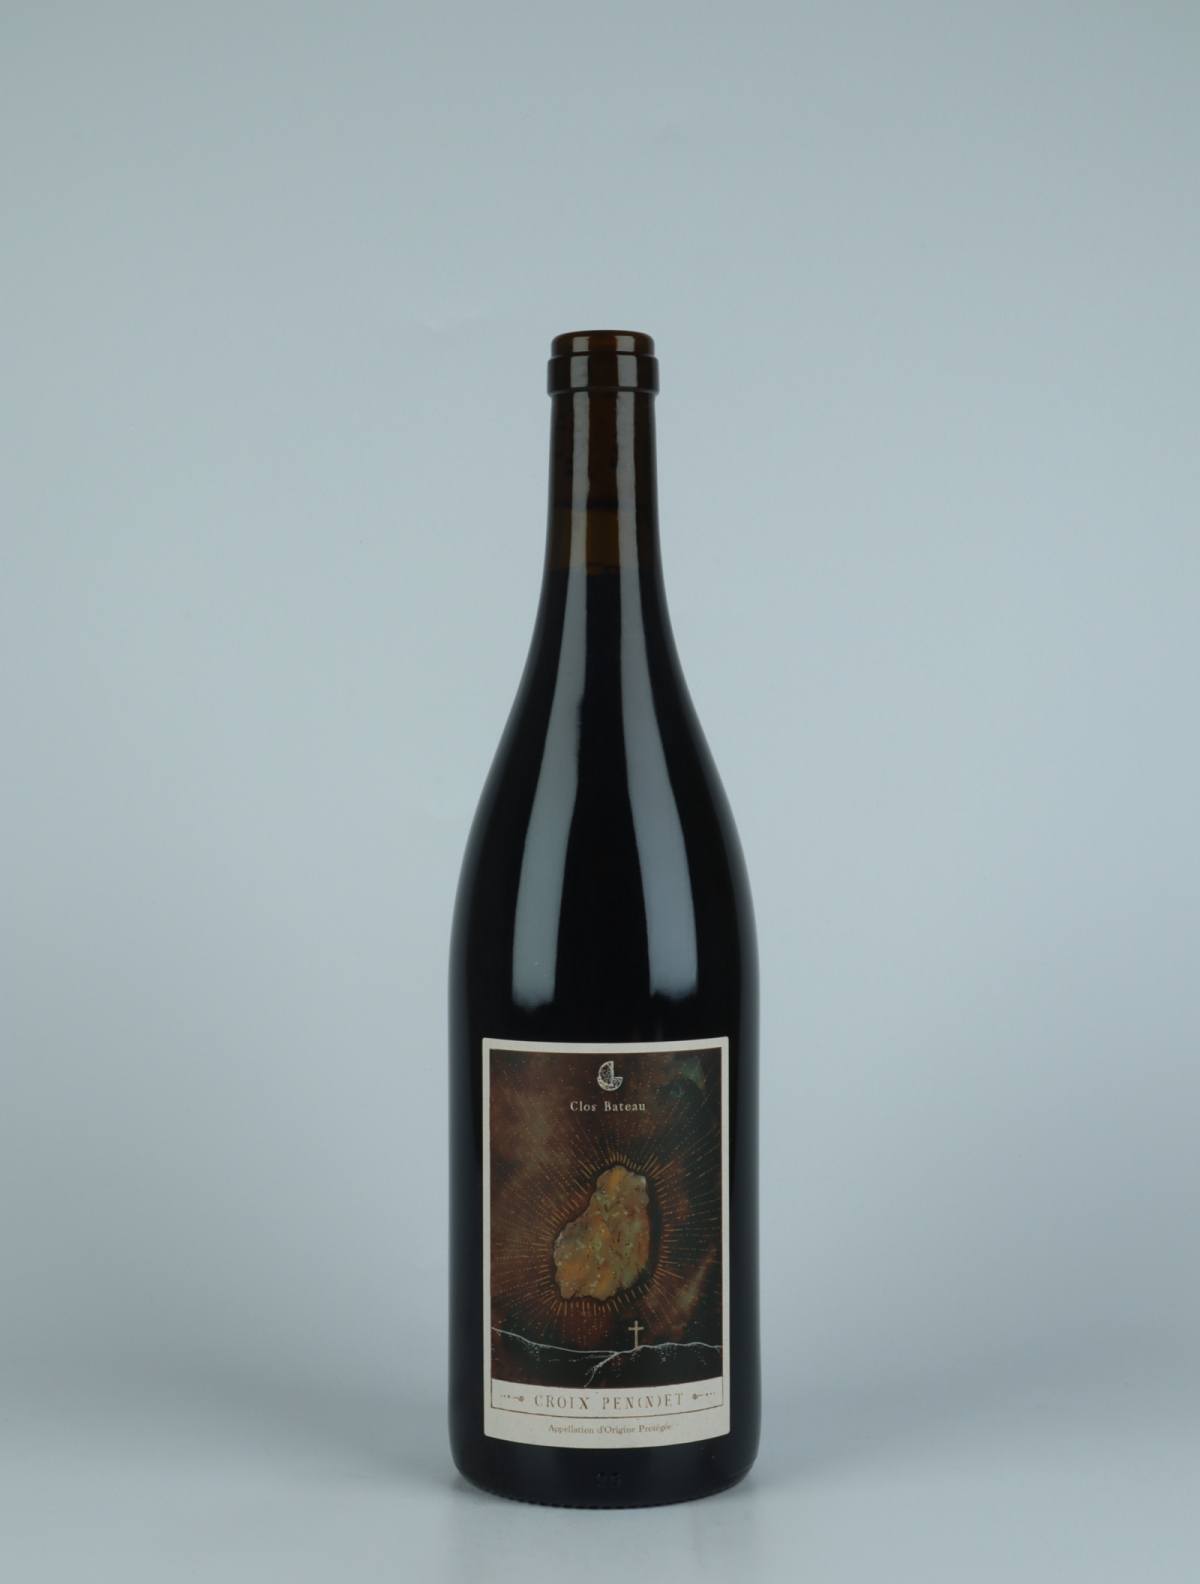 A bottle 2021 Croix Pennet Red wine from , Beaujolais in France